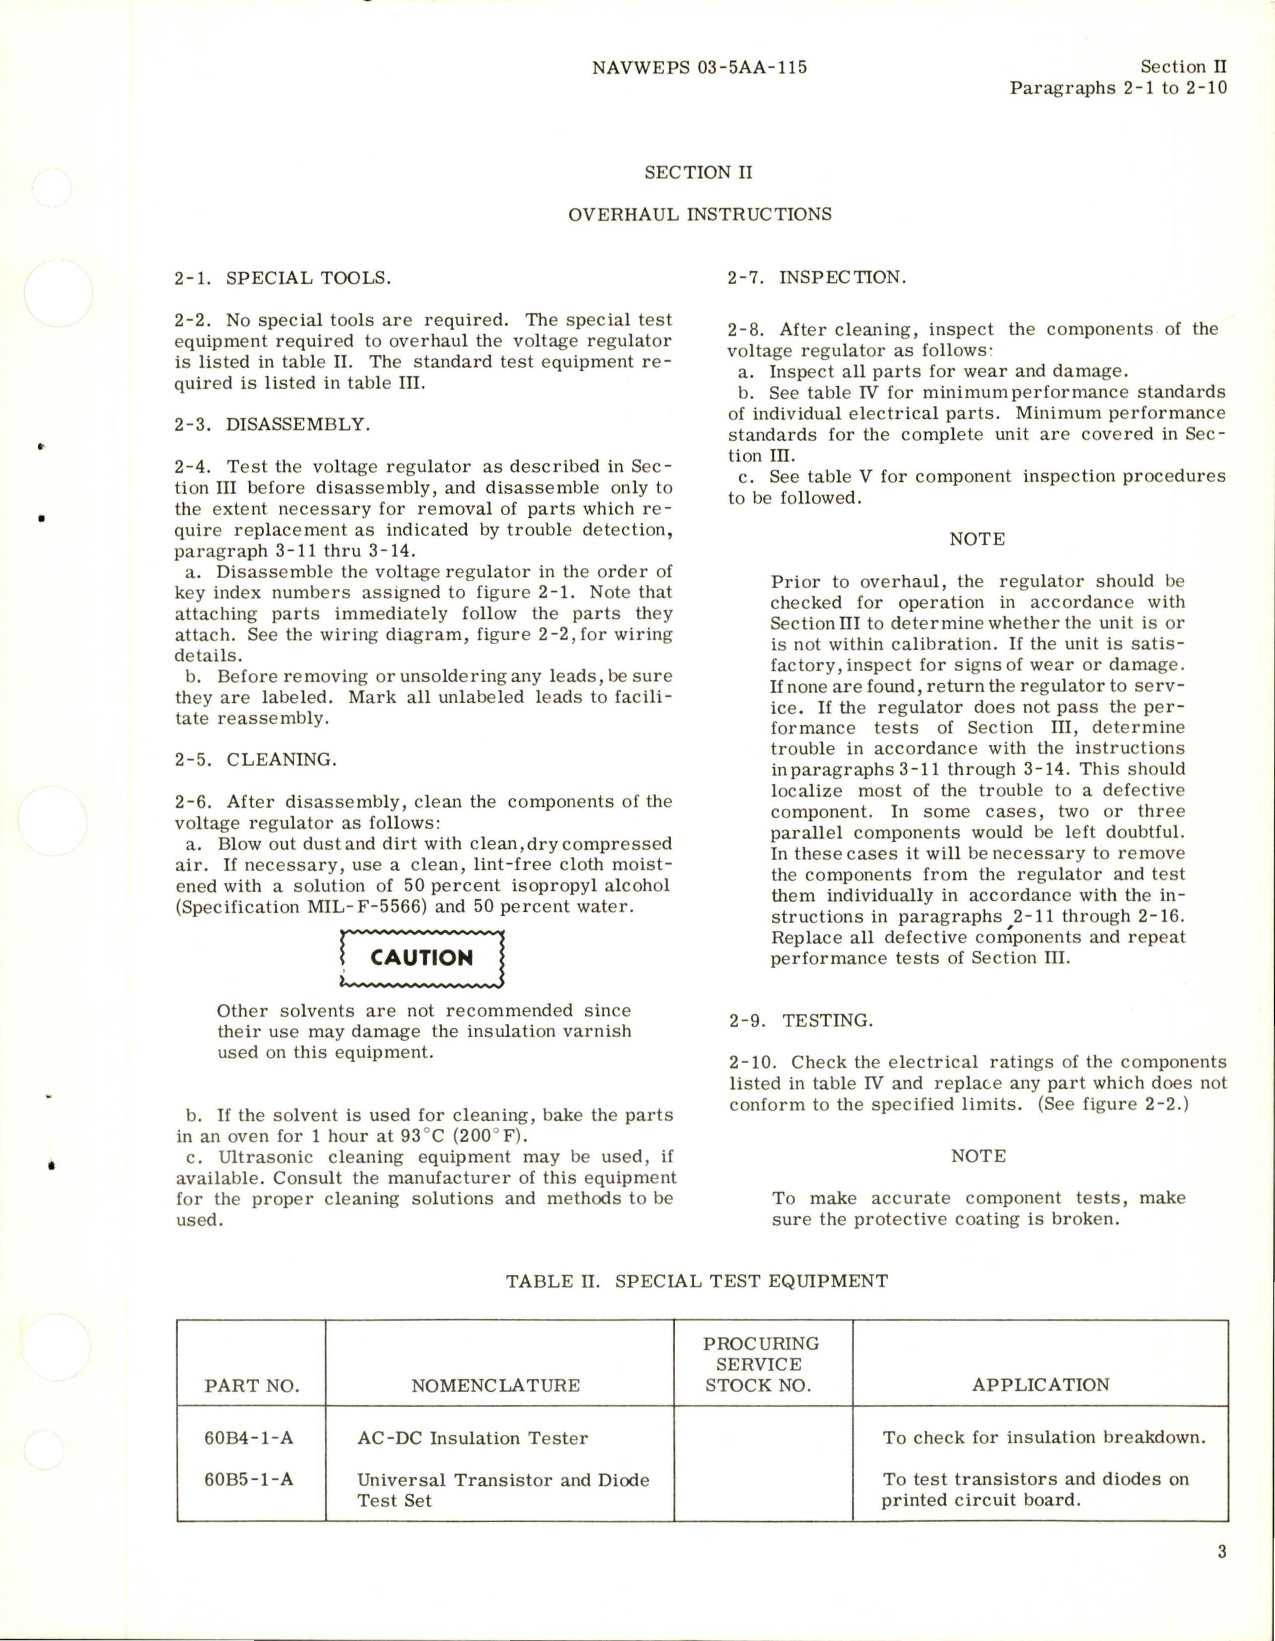 Sample page 7 from AirCorps Library document: Overhaul Instructions for A-C Voltage Regulator - Type 20B100-12-A 